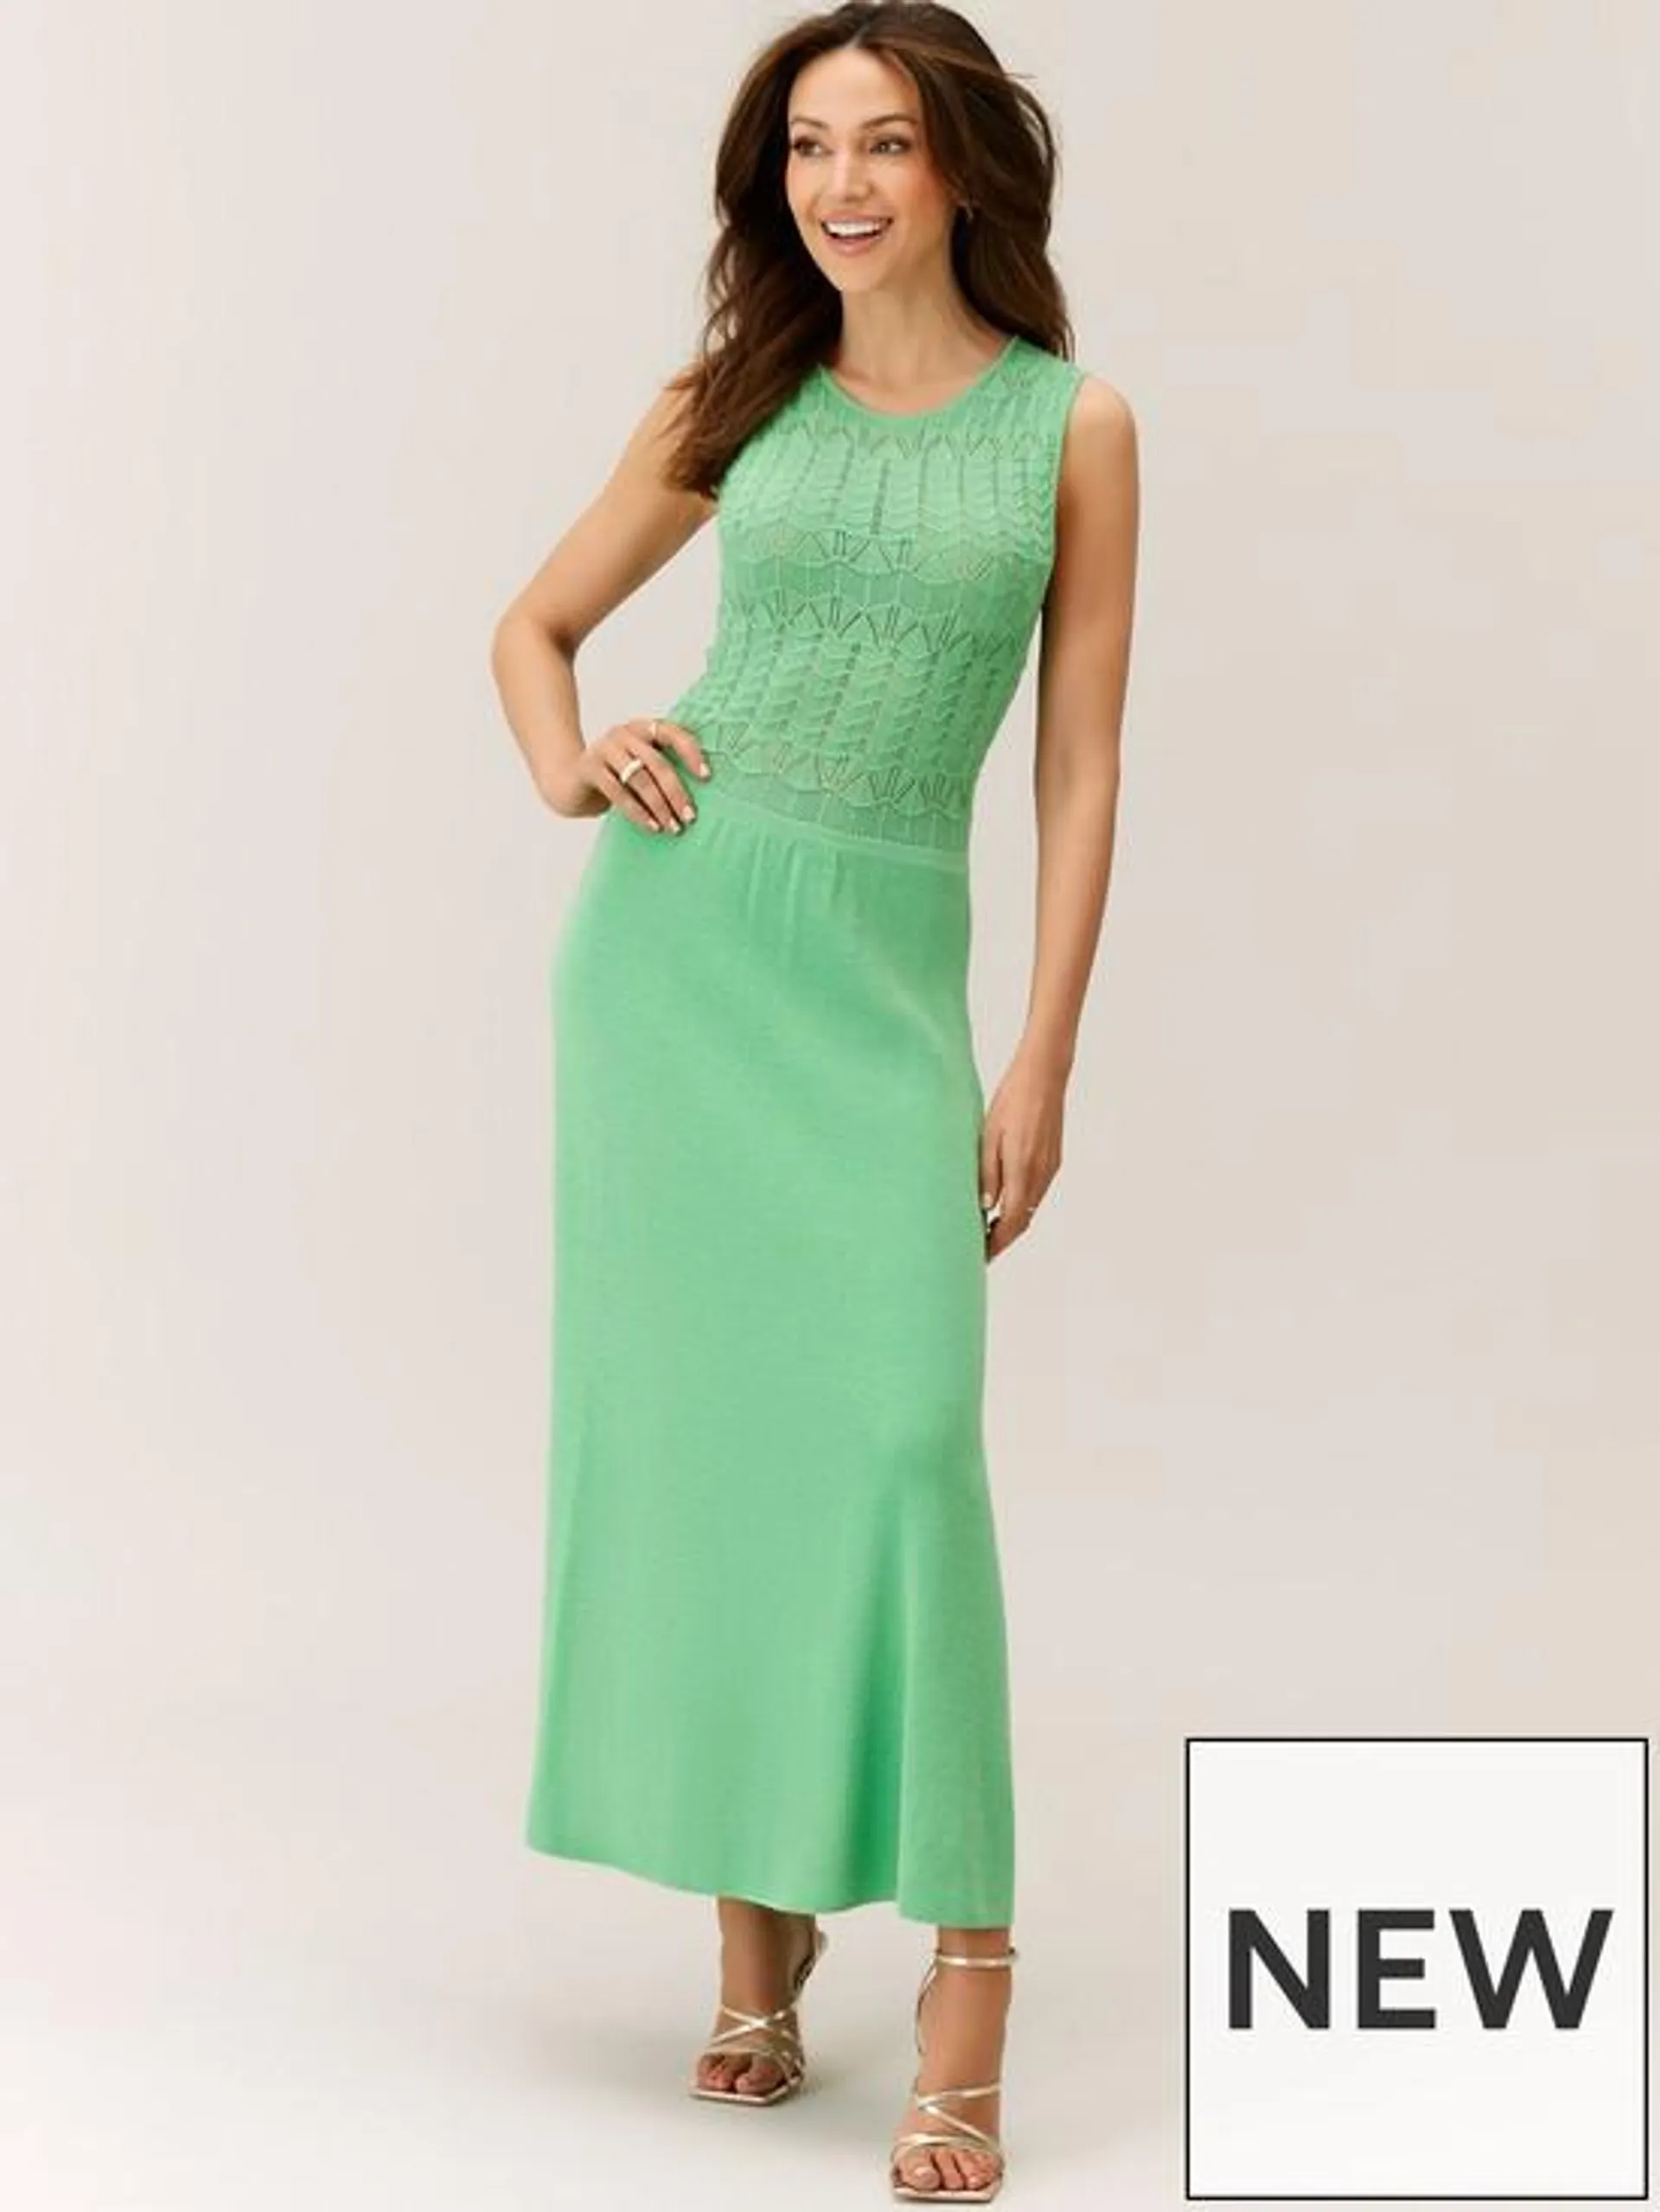 Michelle Keegan Ruched Front Textured Knit Midi Dress - Green